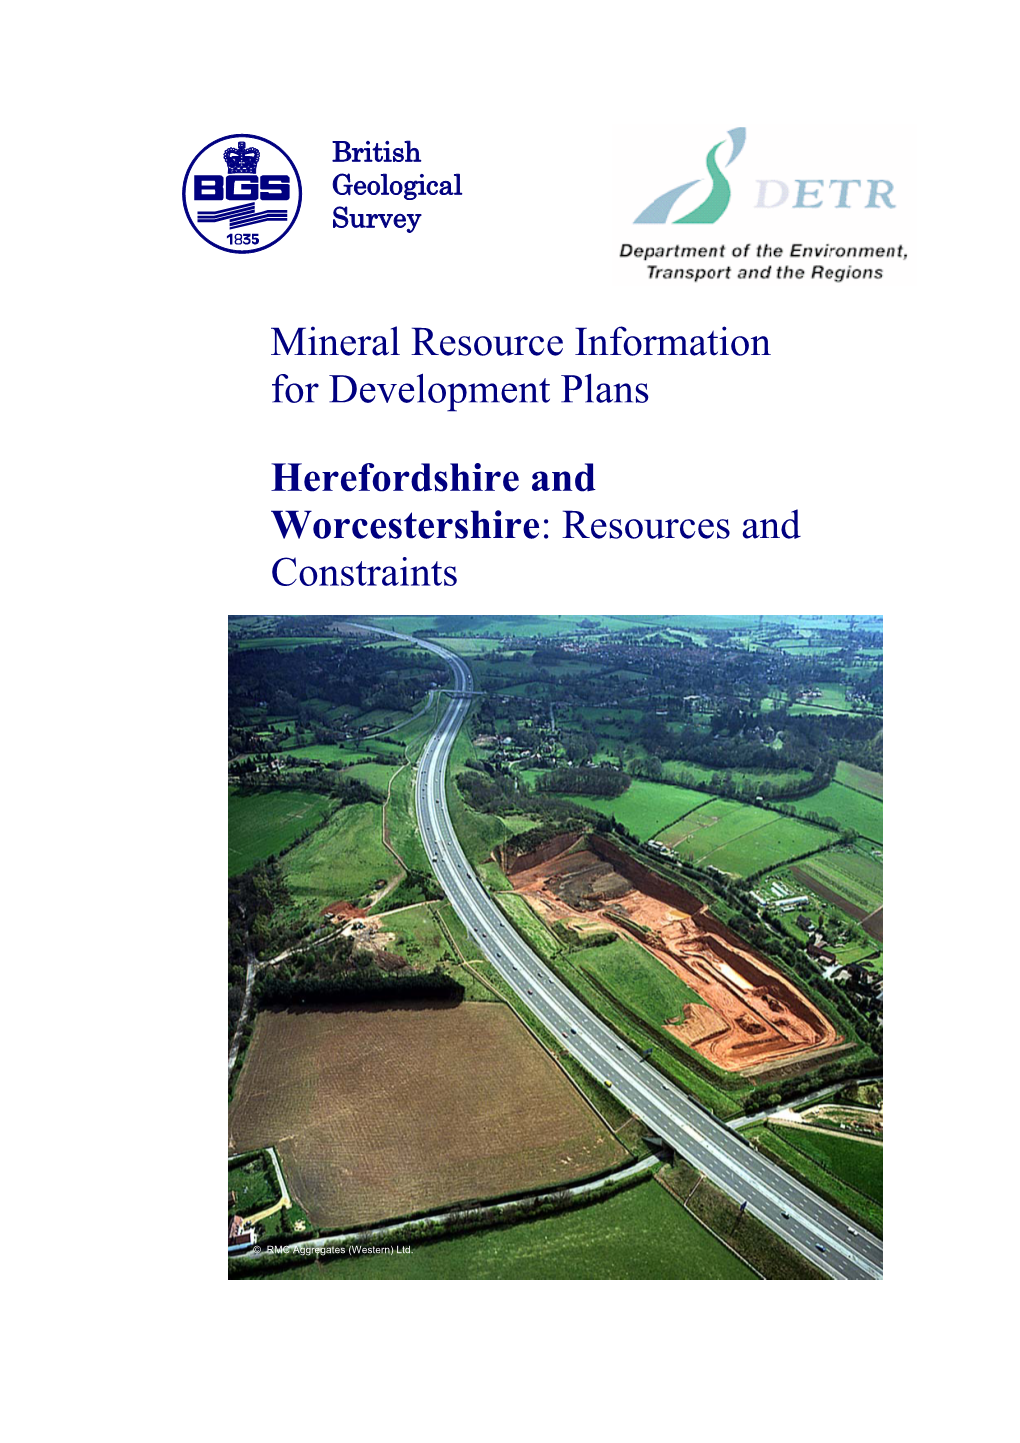 Mineral Resources Report for Hereford and Worcestershire